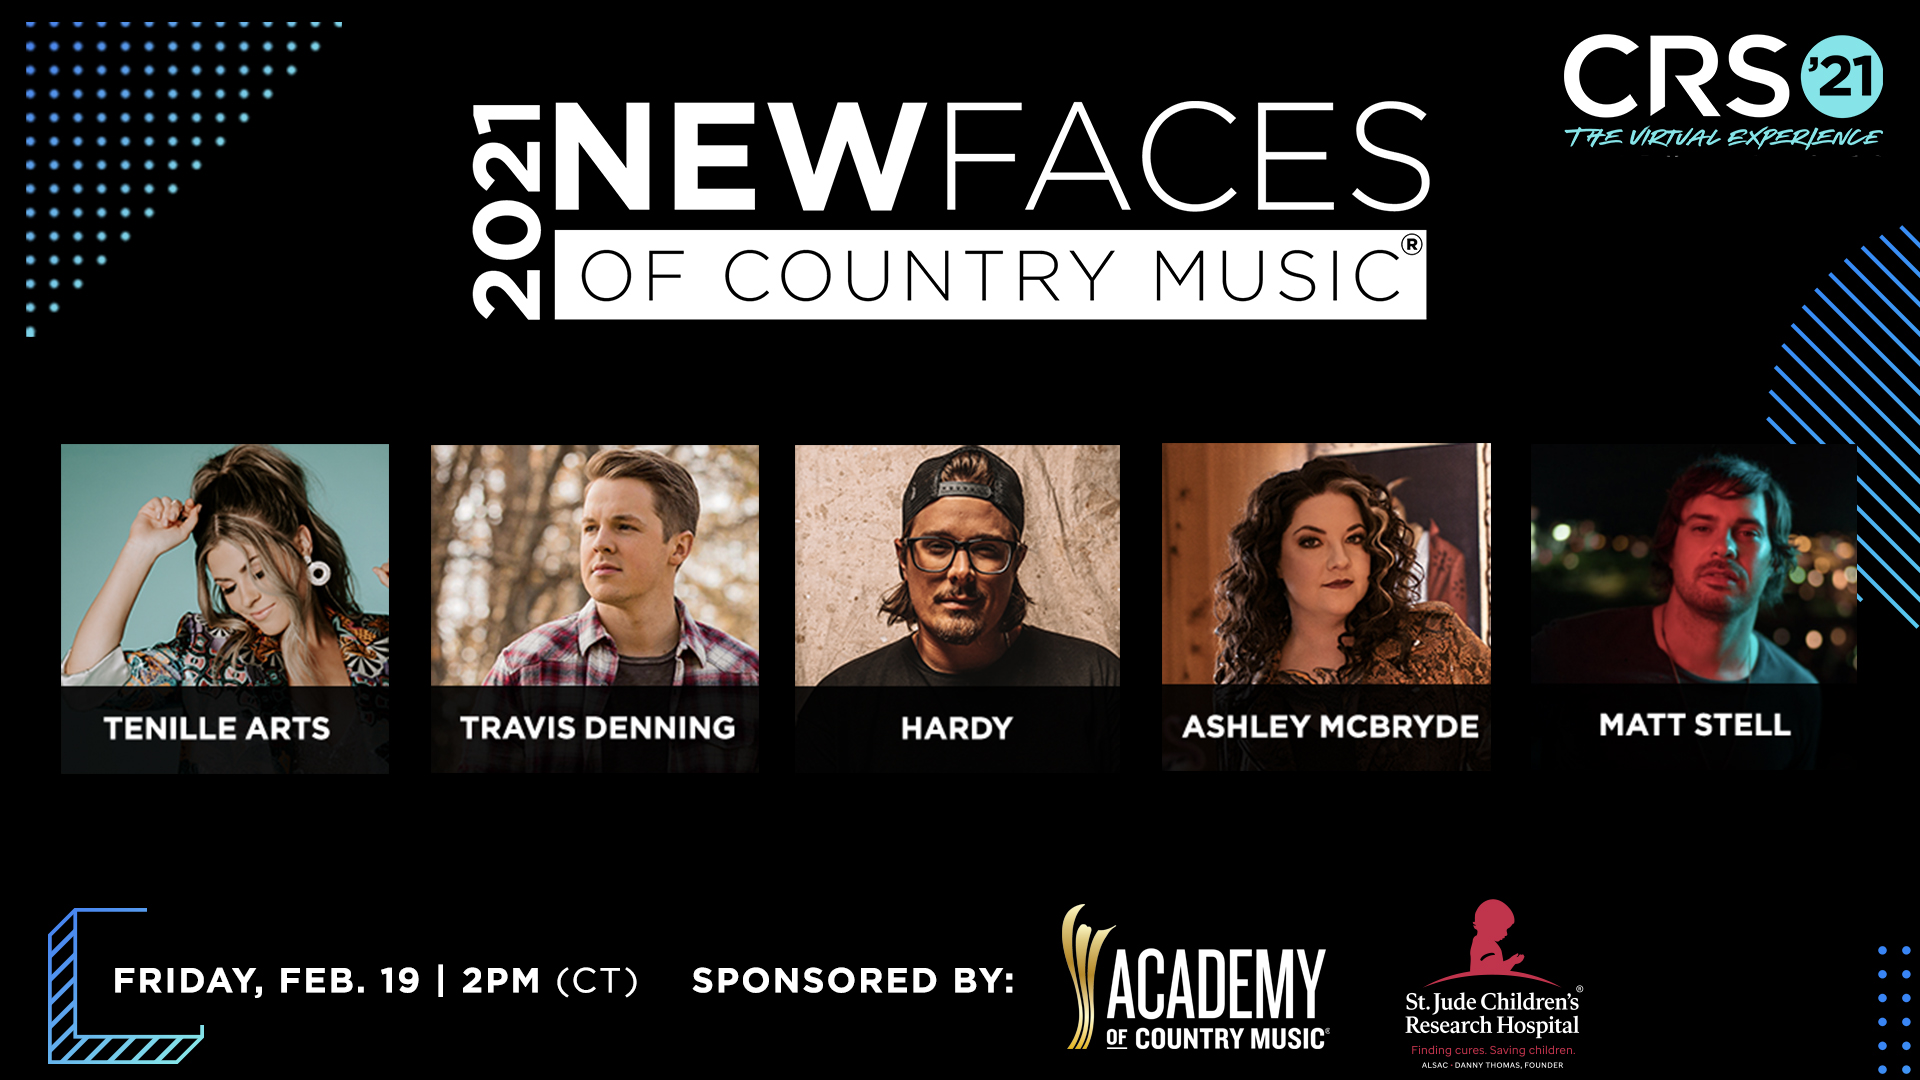 Ashley McBryde, HARDY and More Perform at CRS ‘New Faces of Country Music’ Virtual Concert (Review)